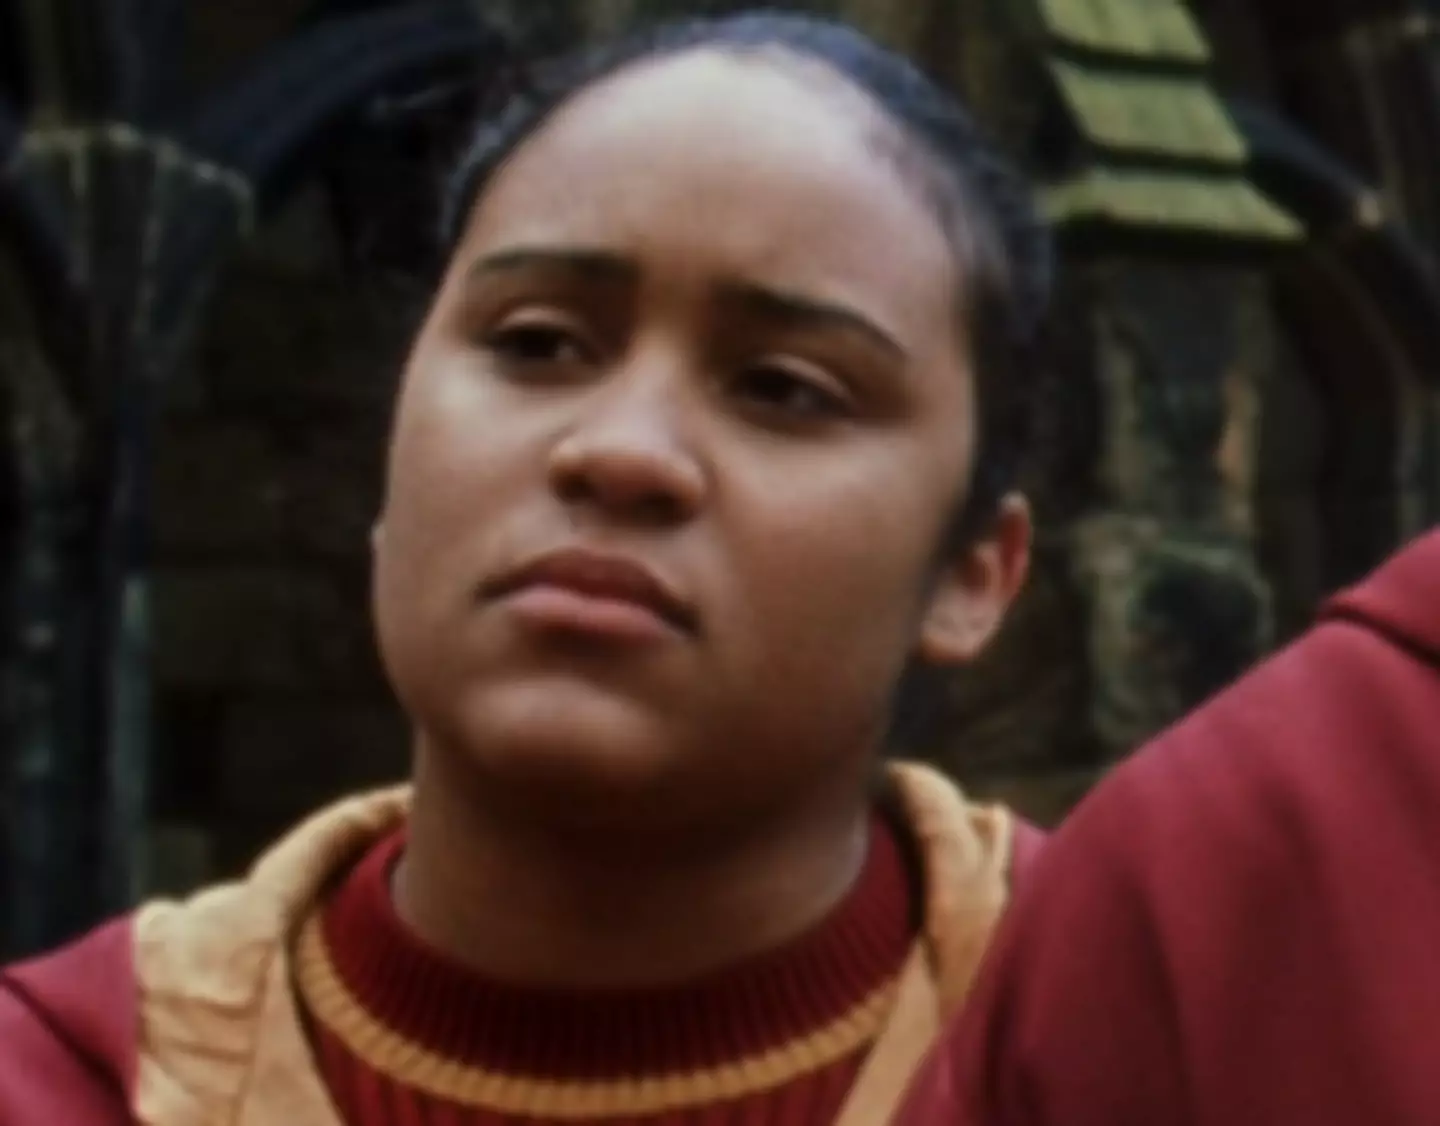 Rochelle Douglas took on the role of chaser Alicia Spinnet.